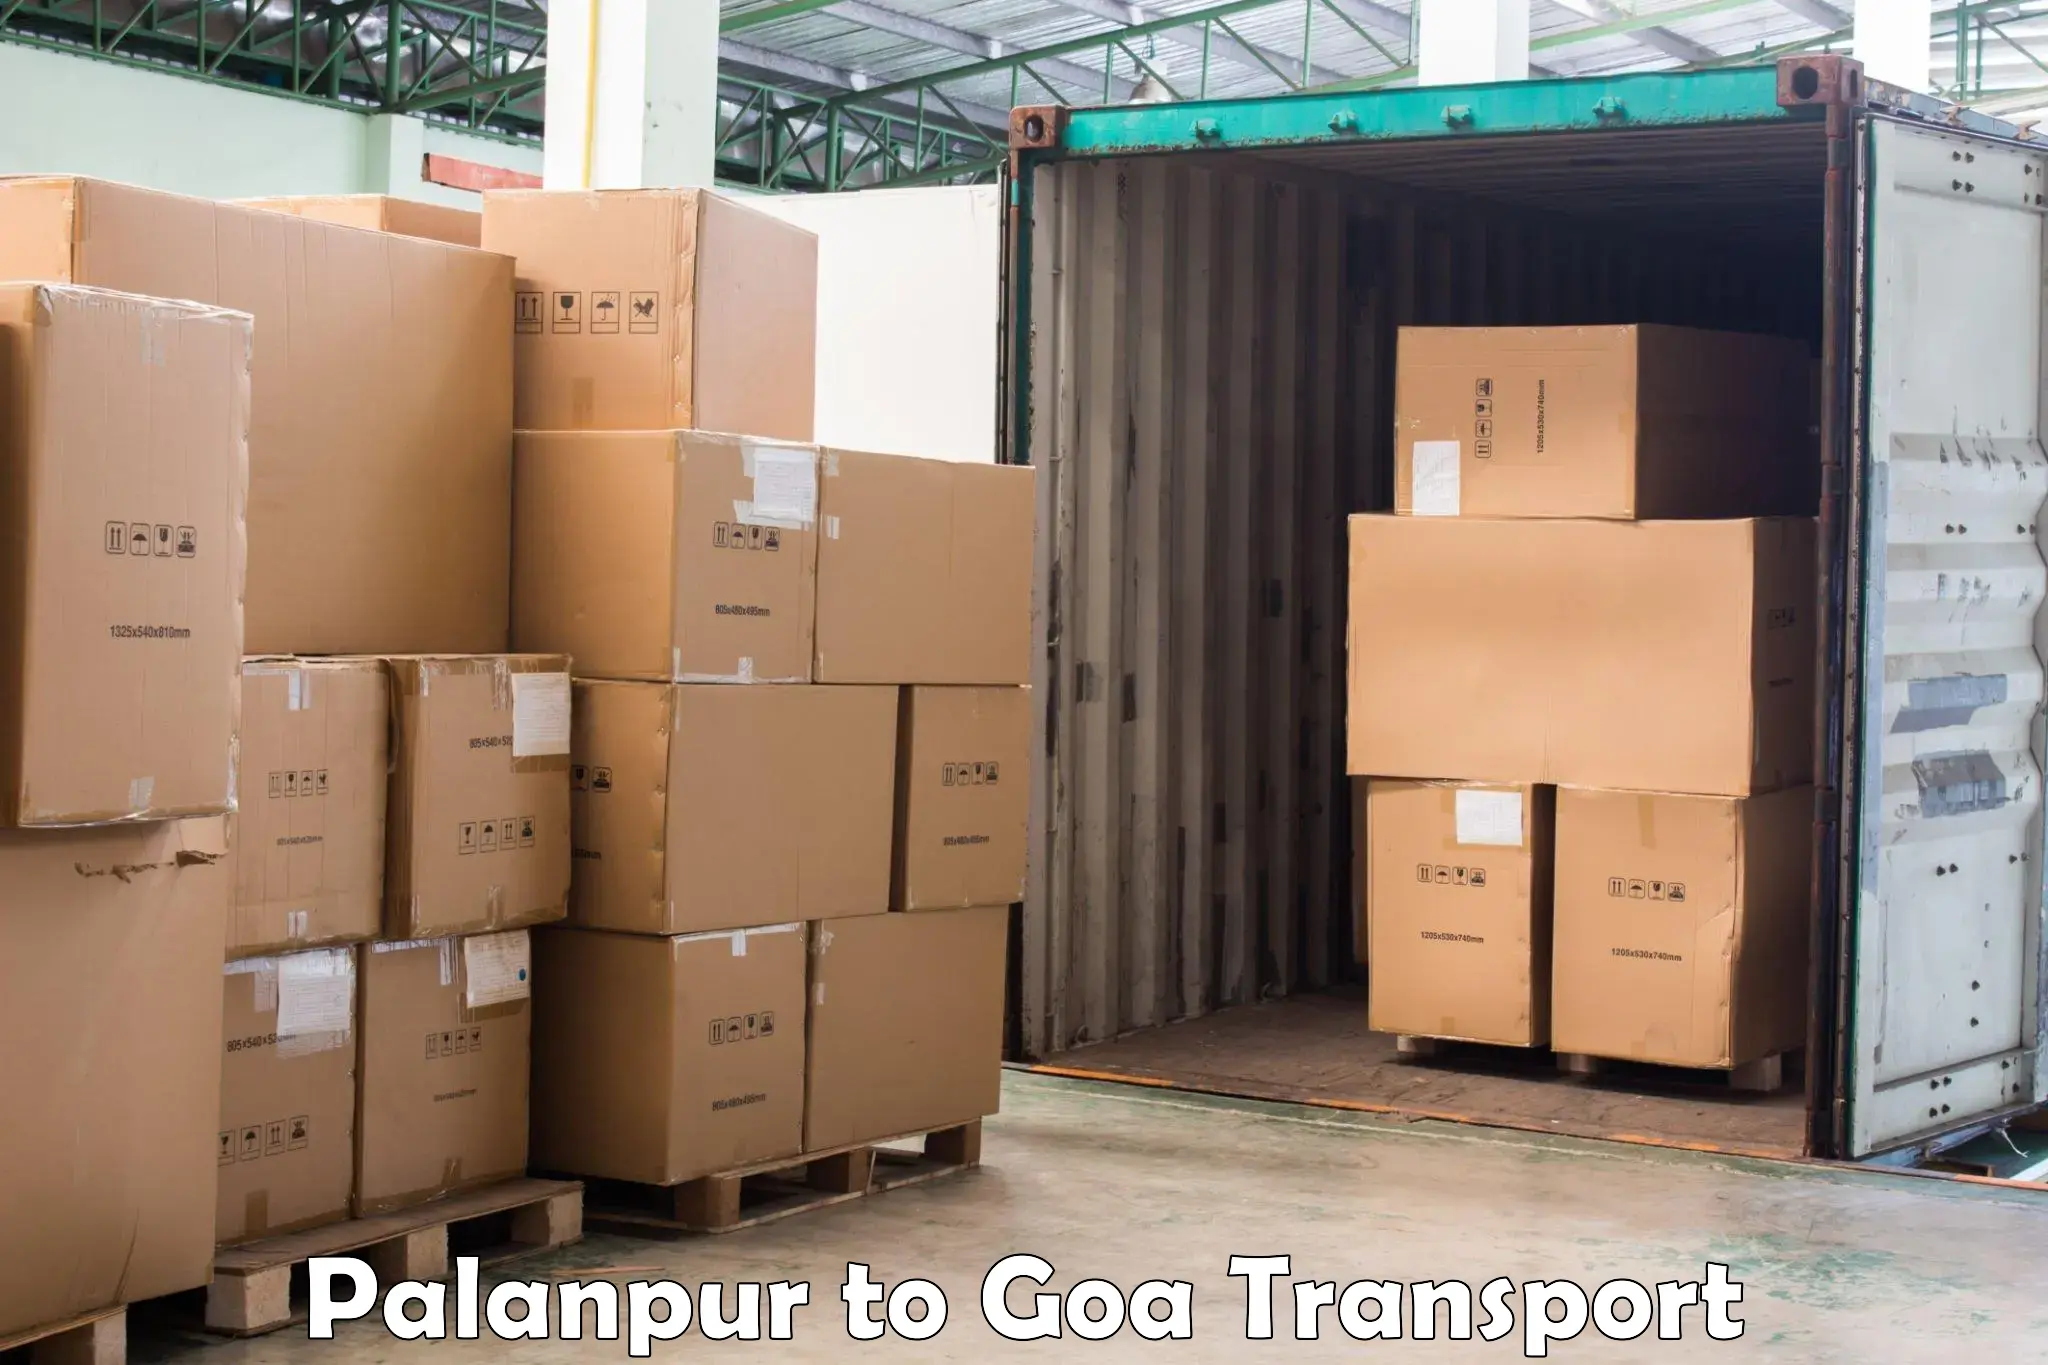 Nearby transport service Palanpur to Margao